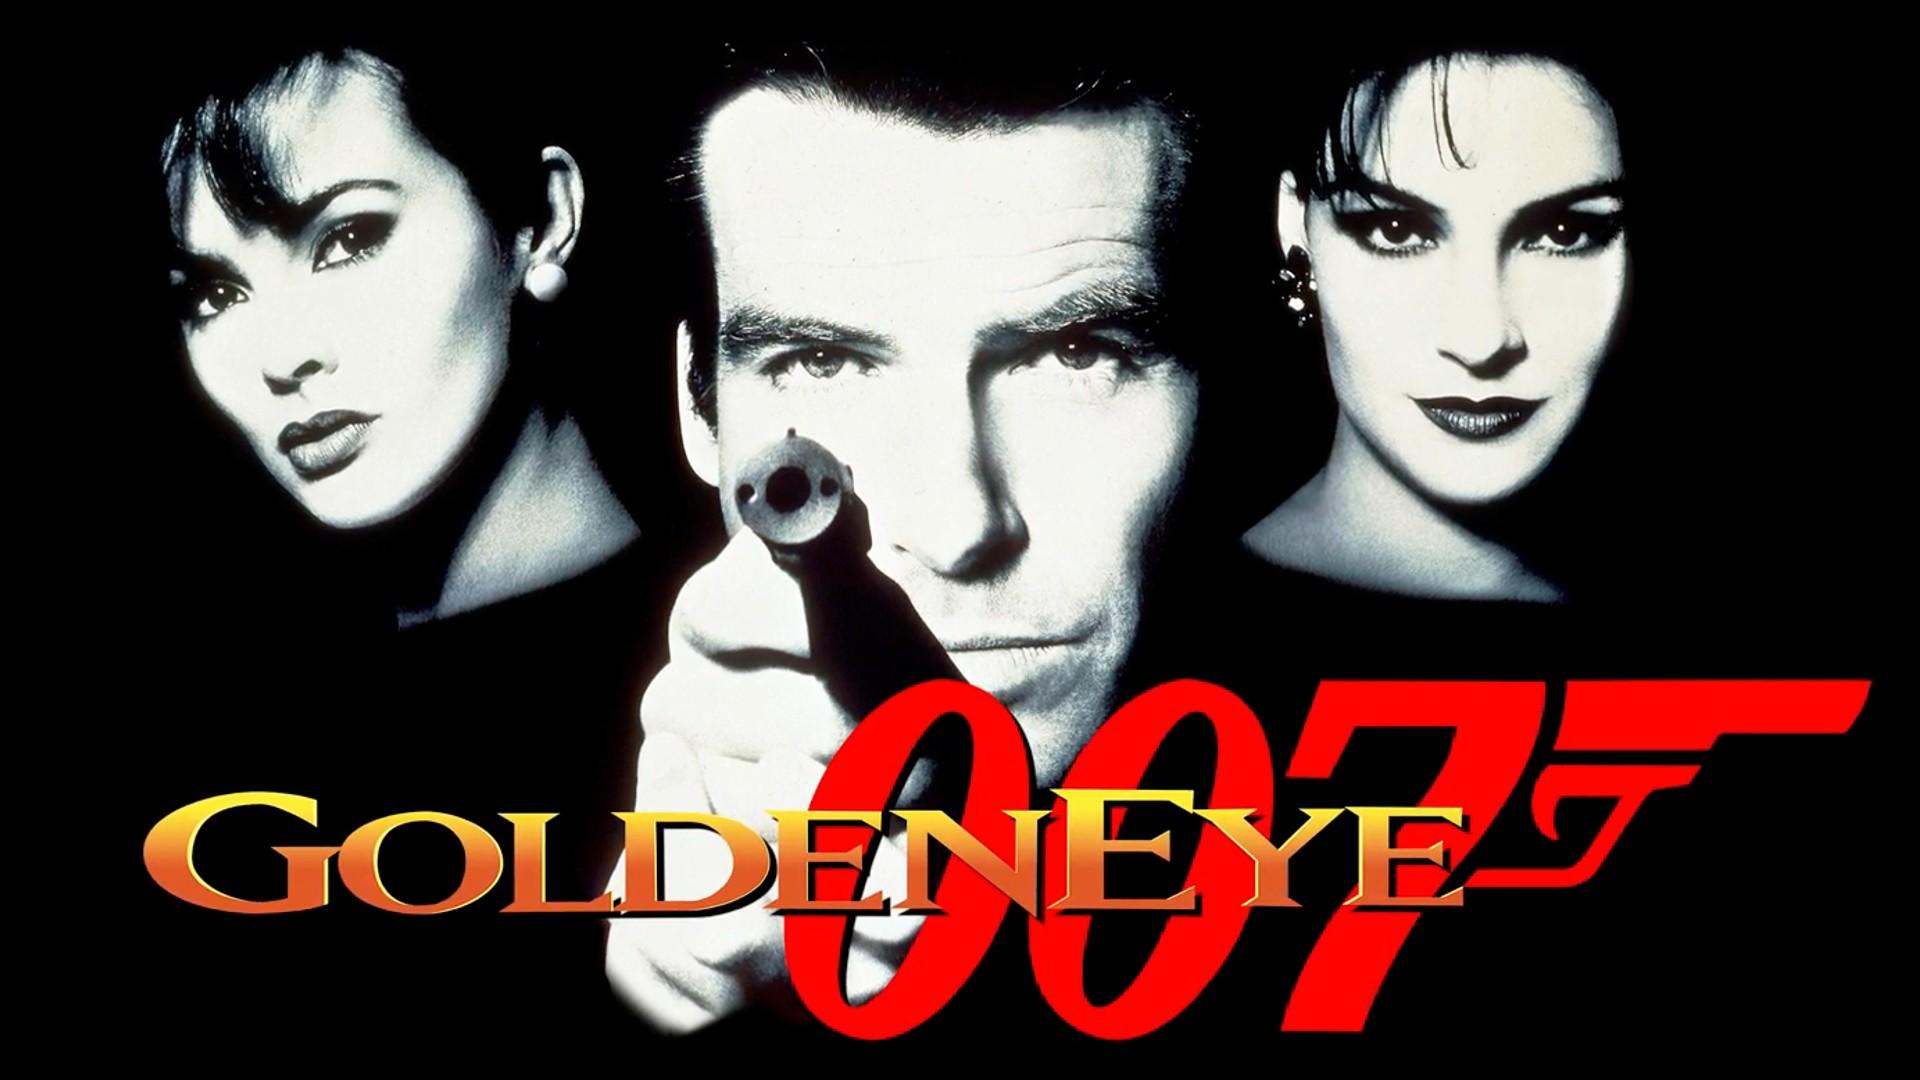 GoldenEye 007 releases this week on Nintendo Switch and Xbox consoles